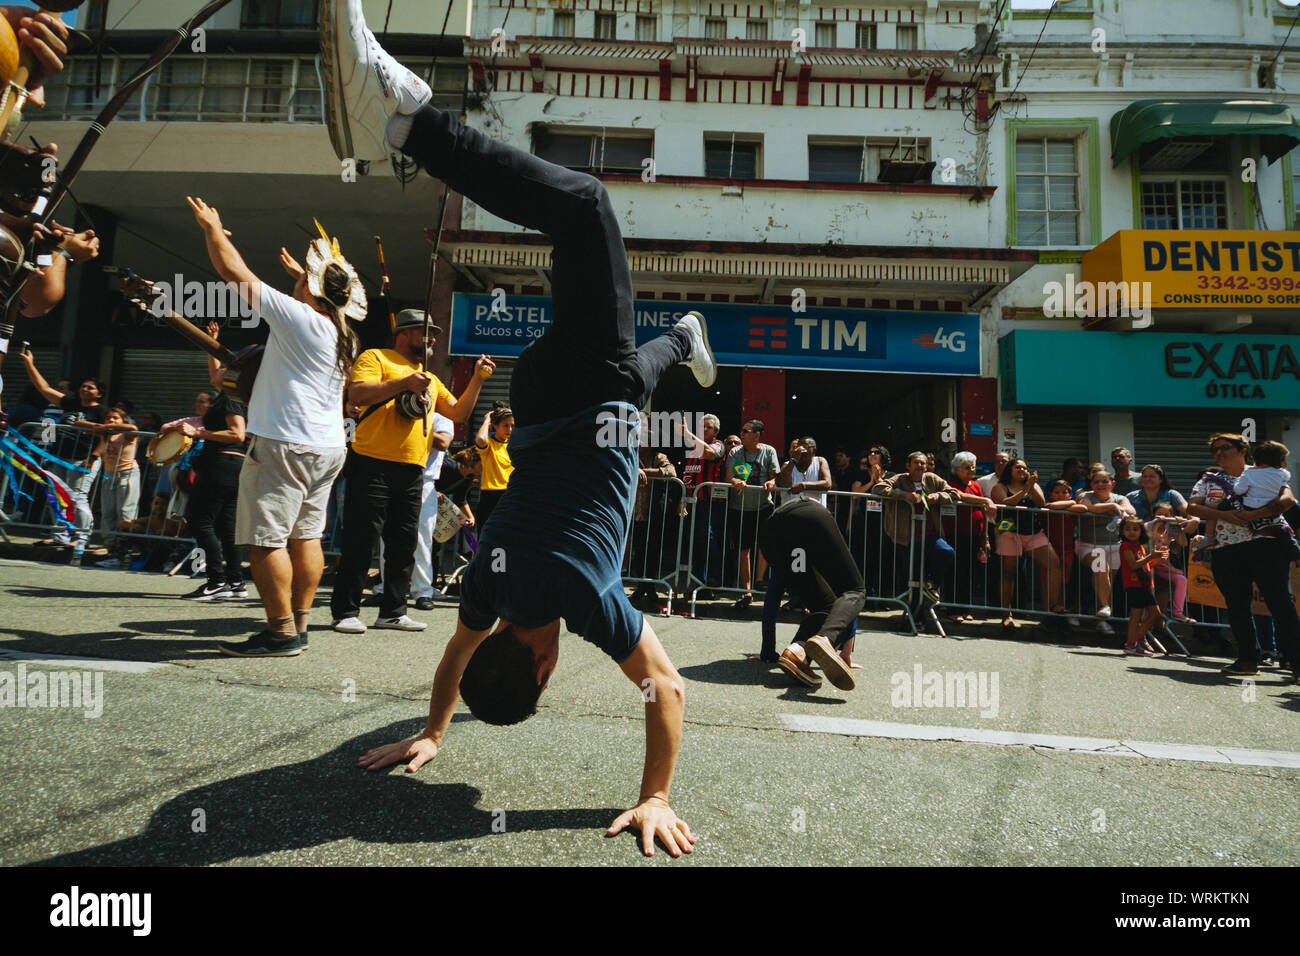 Capoeira fighters between a crowd in the streets during a pro environment protest during the brazilian independence day, asking to save the amazonia. Stock Photo